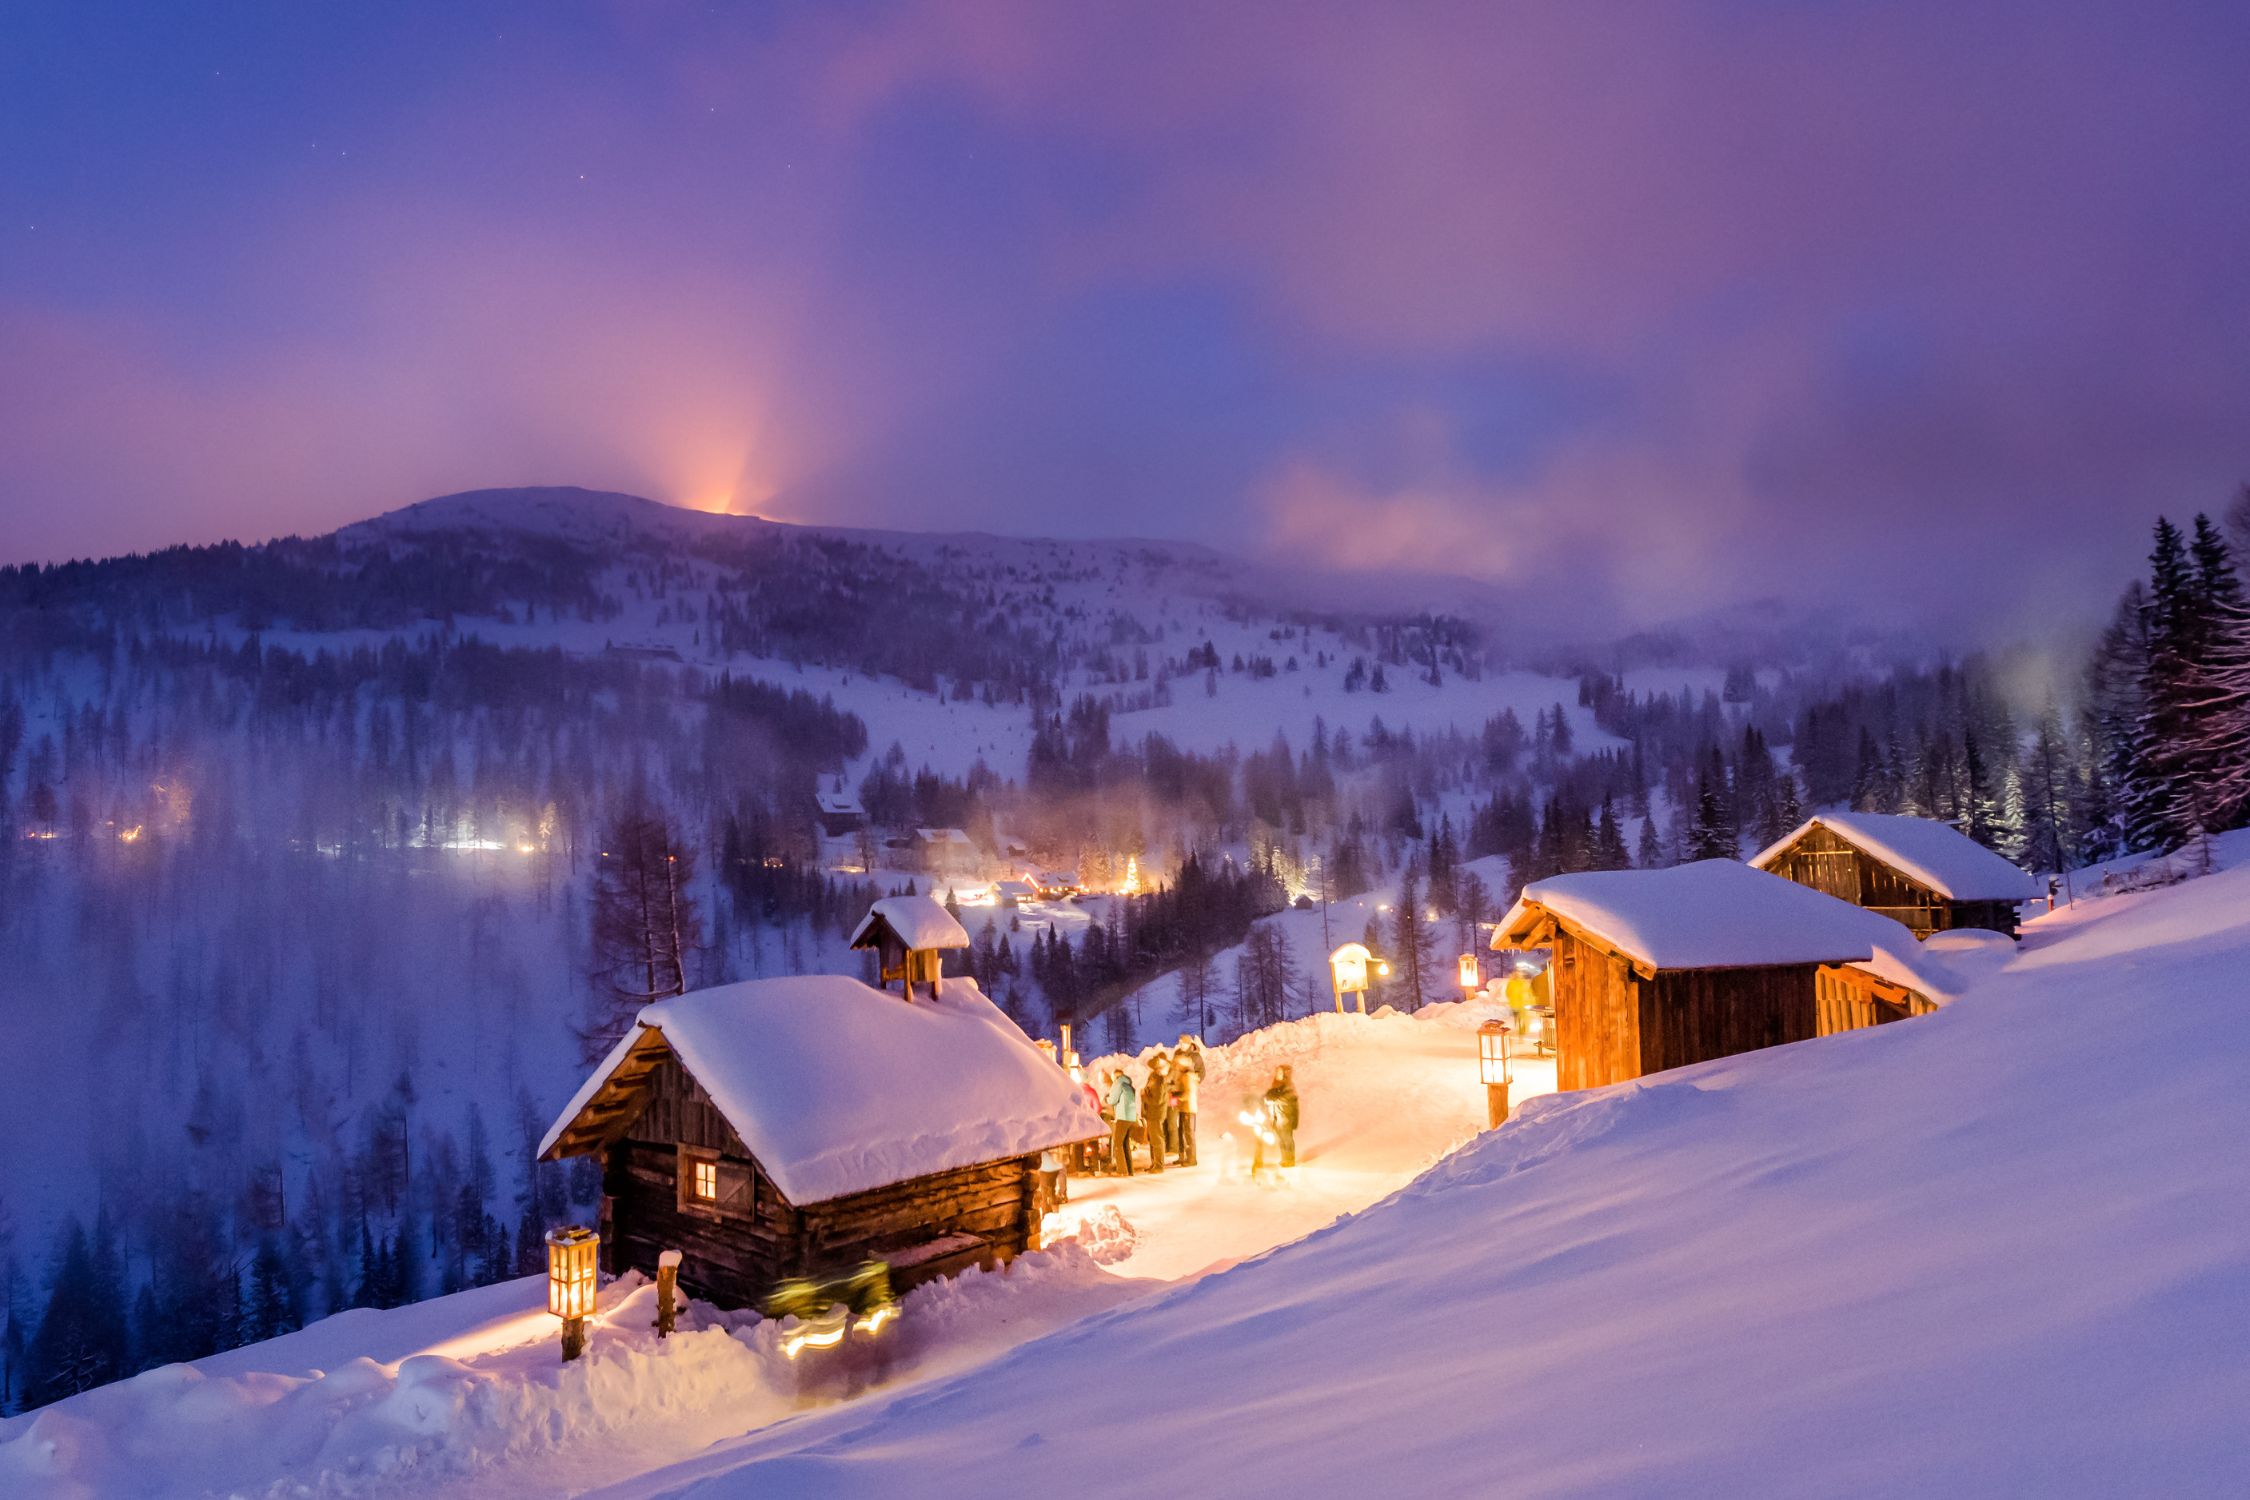 Illuminated huts in the snowy mountains